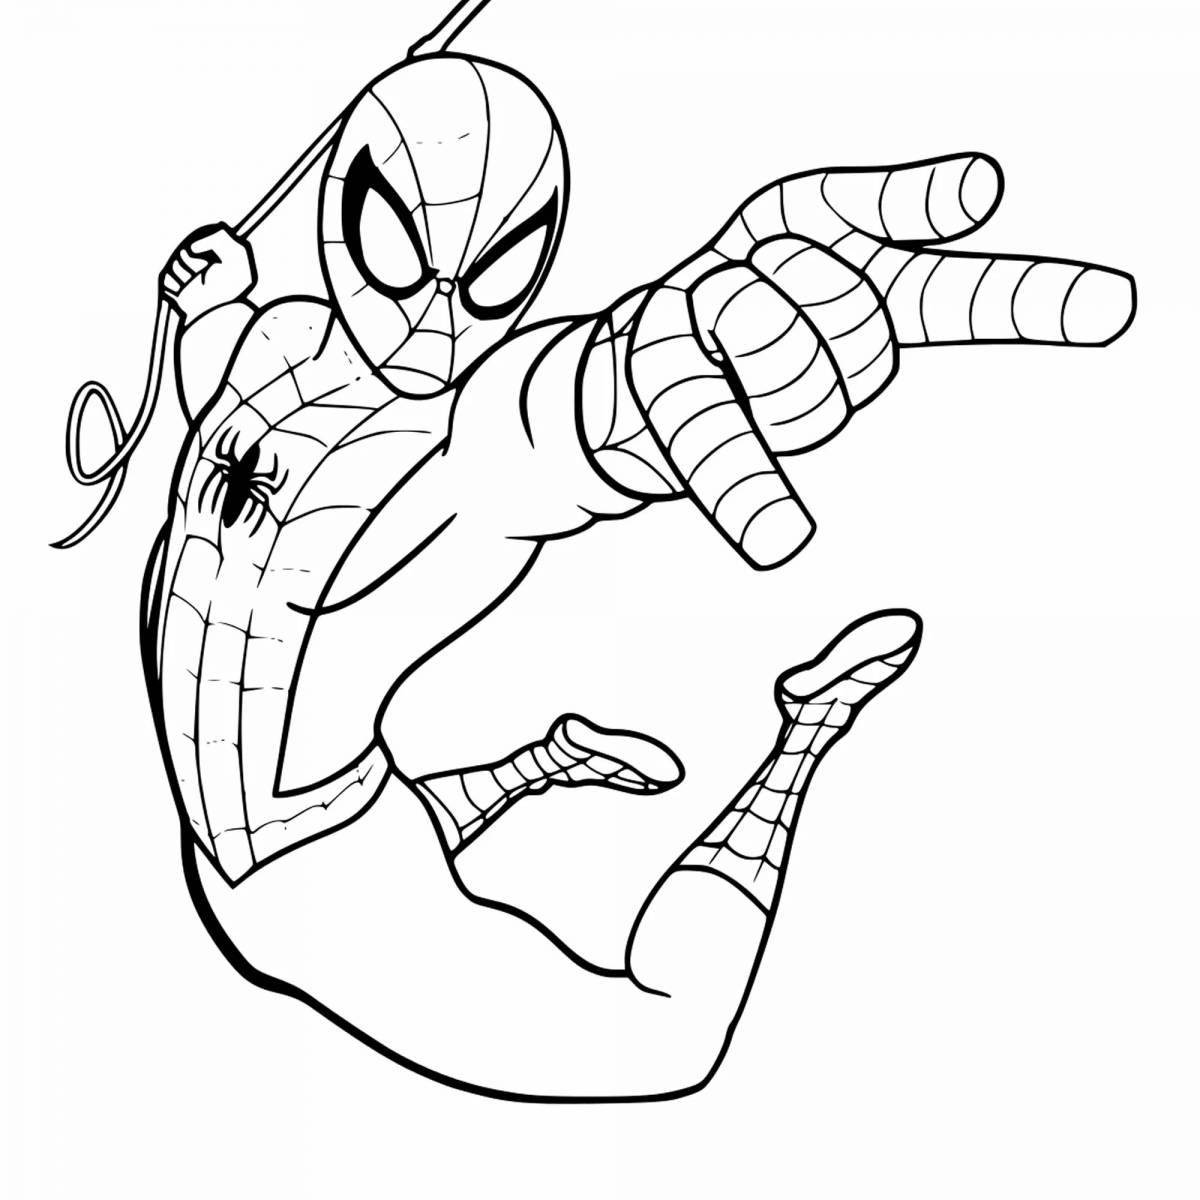 Spiderman's cheerful Christmas coloring book